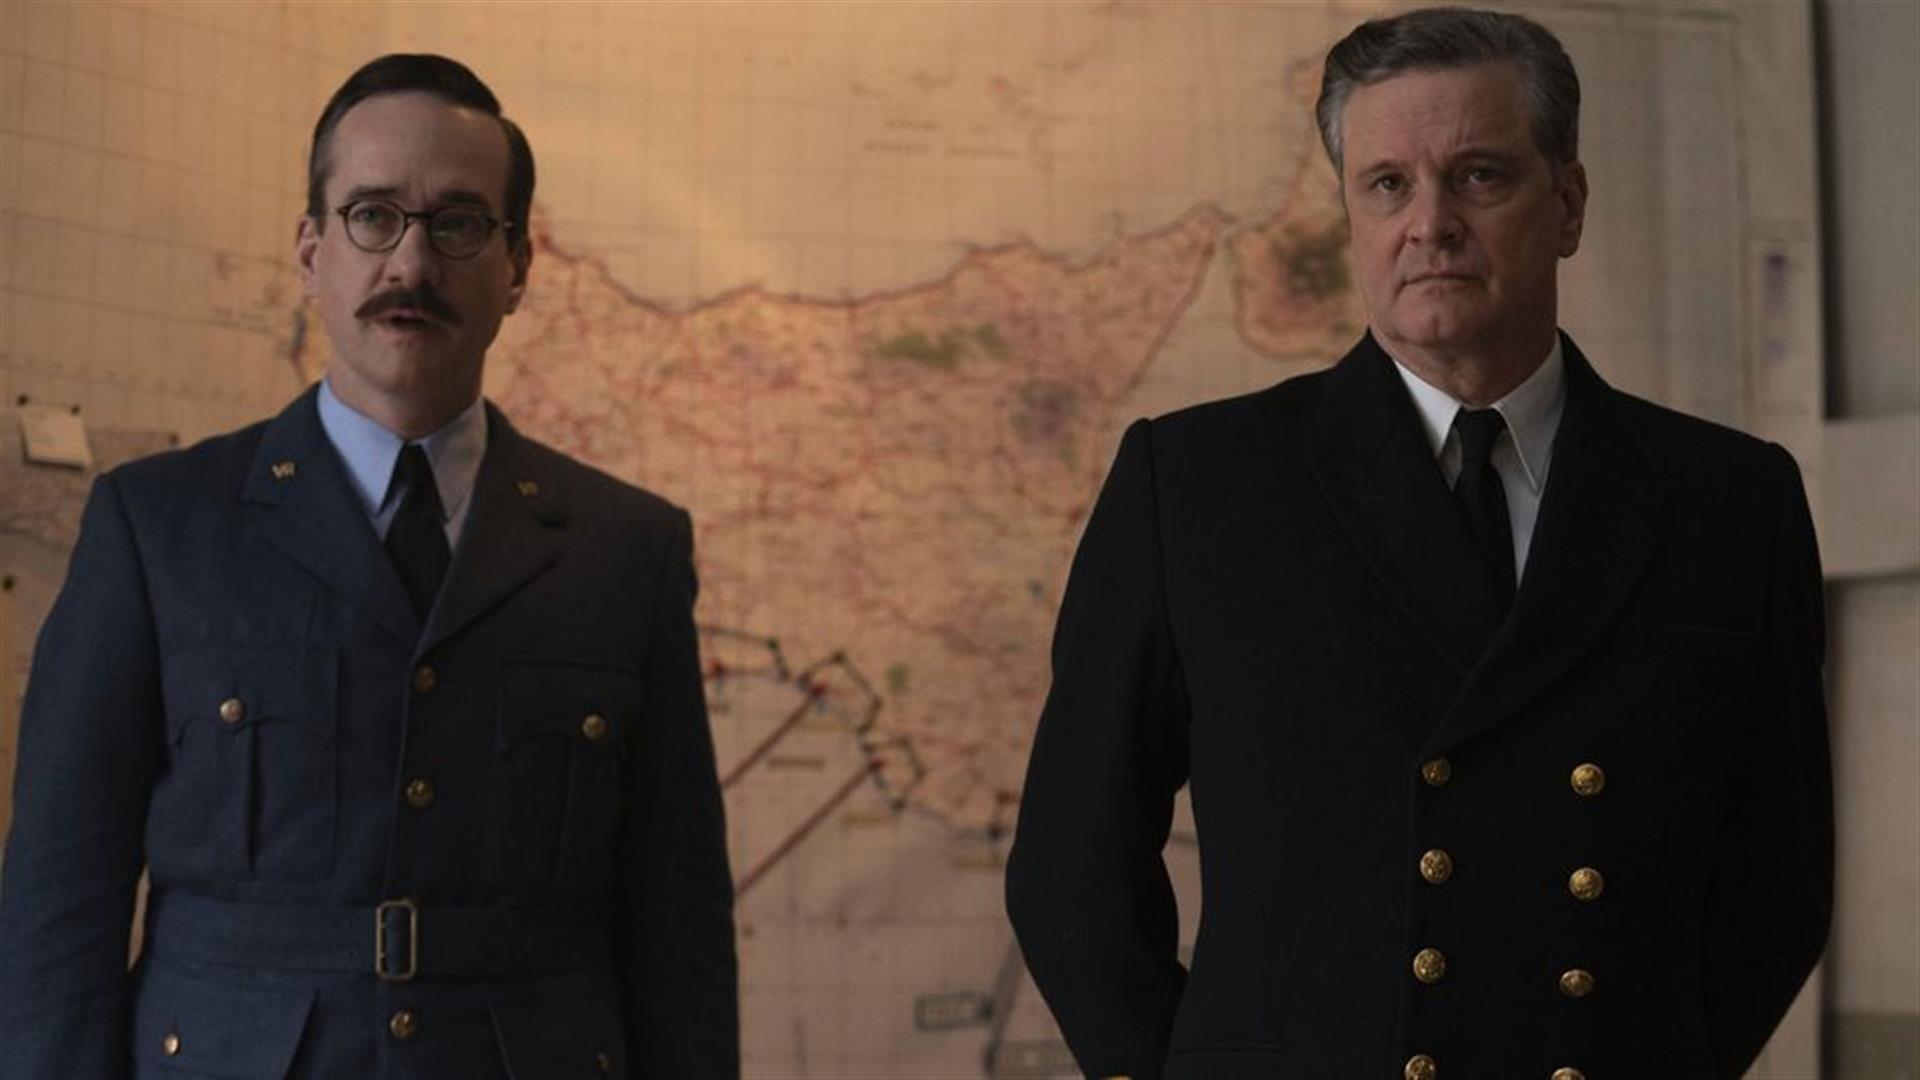 Lowther Cinema: Operation Mincemeat (12A) - Lowther Pavilion